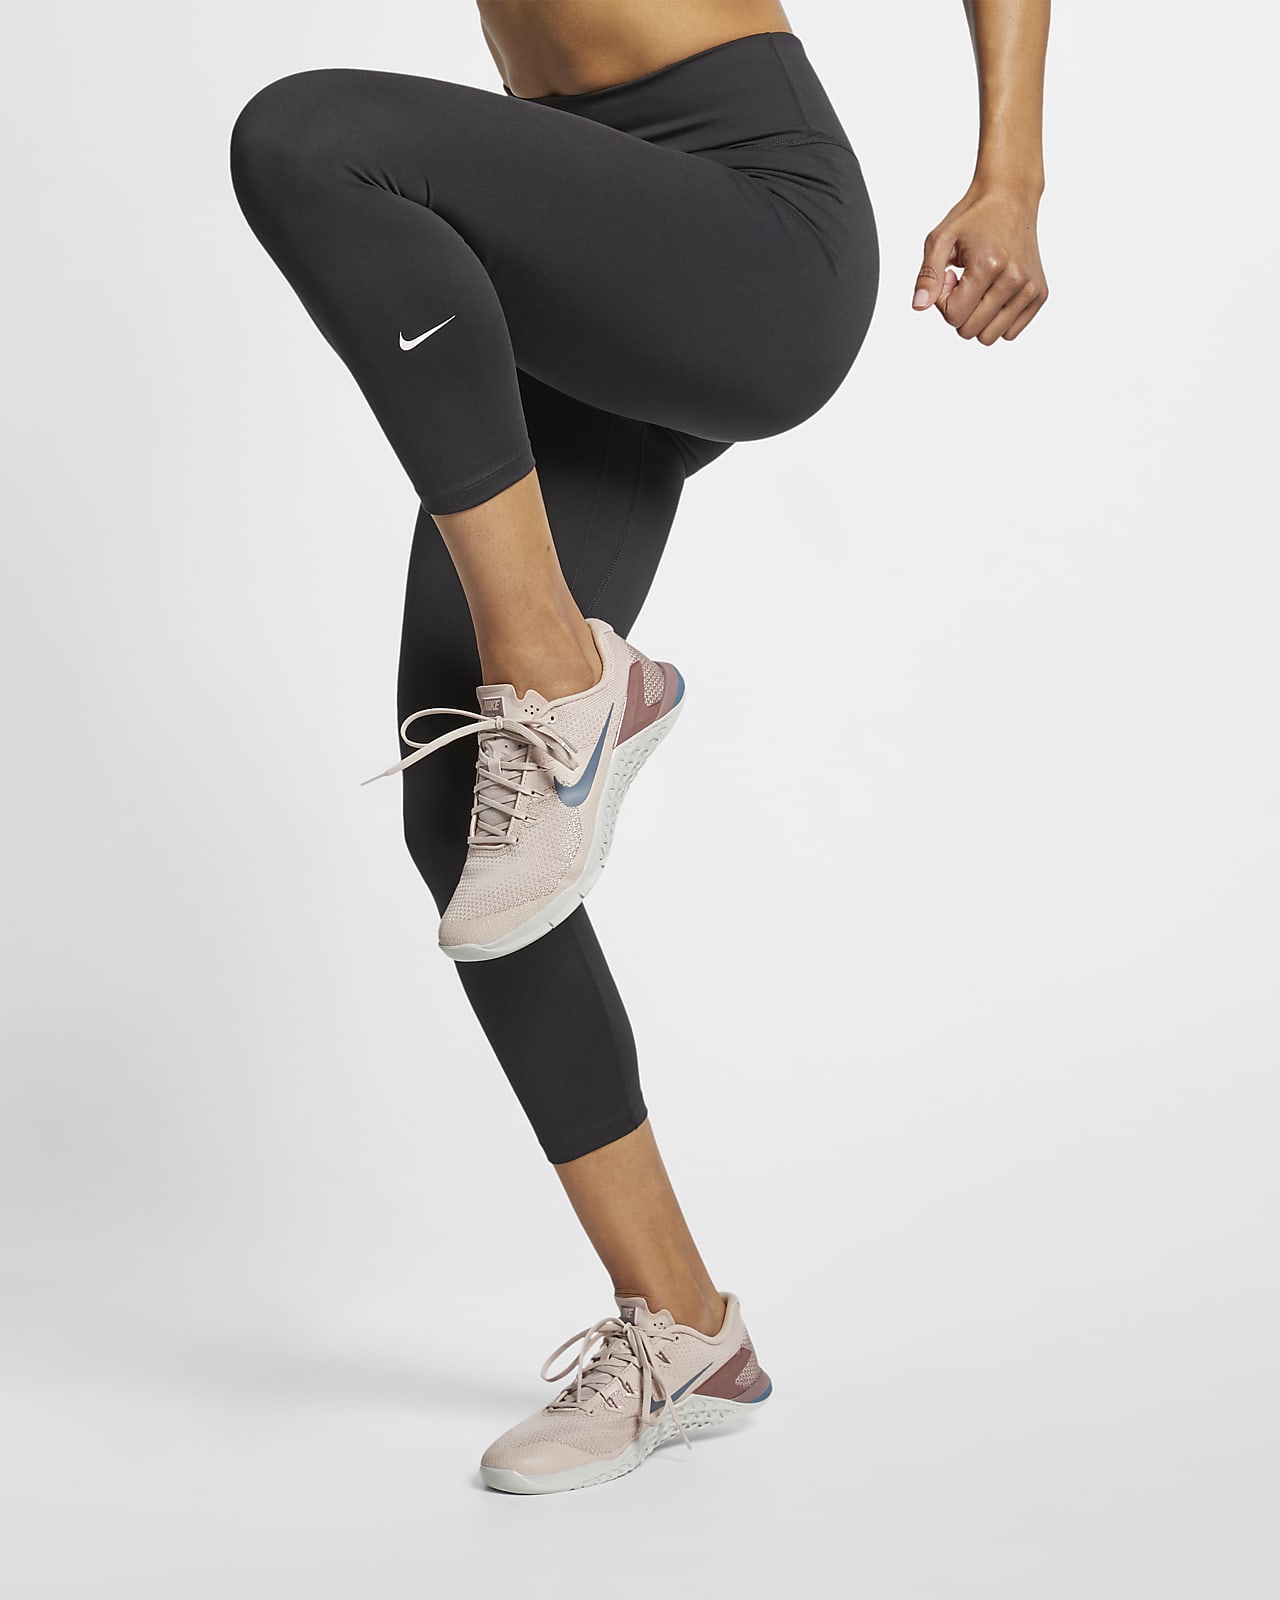 nike one tights review